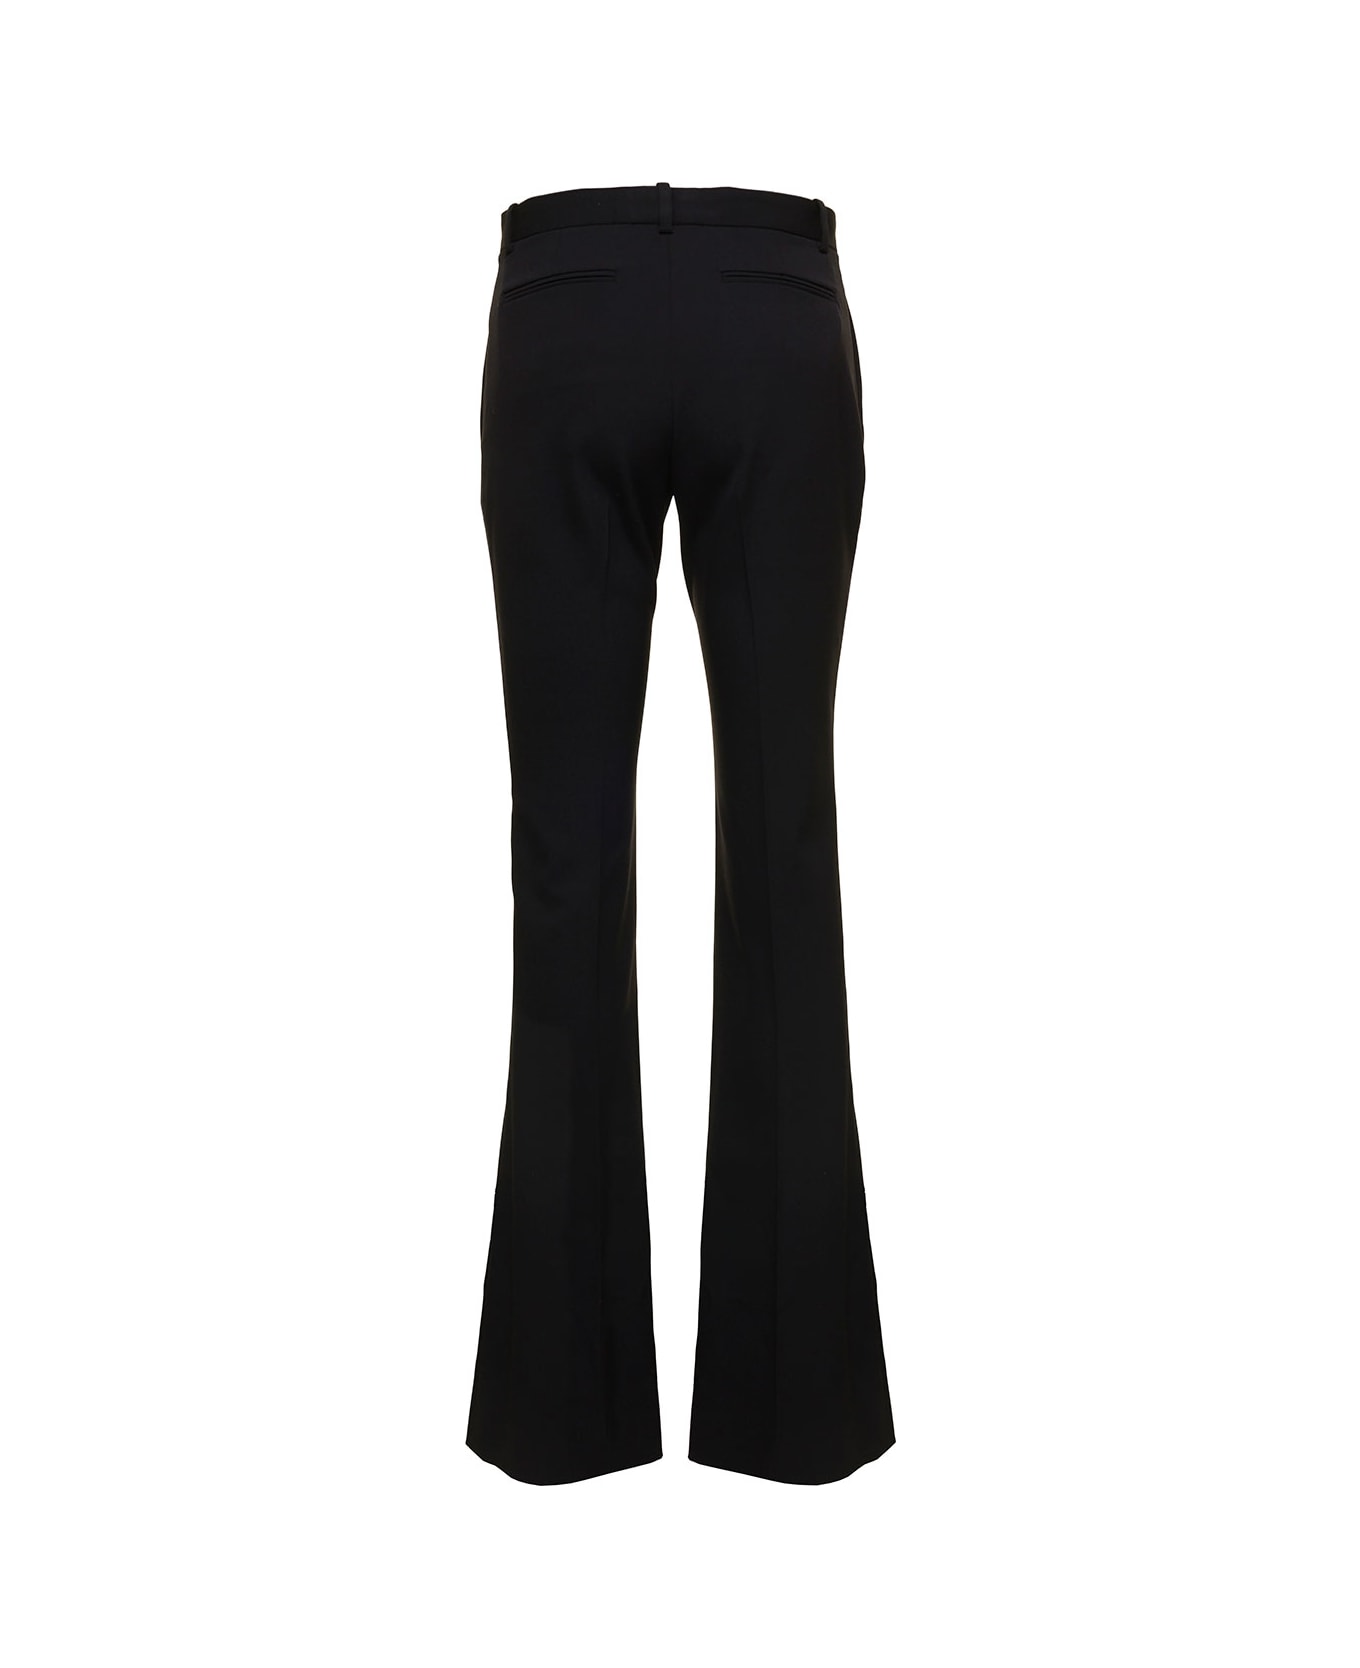 Versace Black Flared Tailored Low Waisted Pants In Stretch Wool Woman - Black